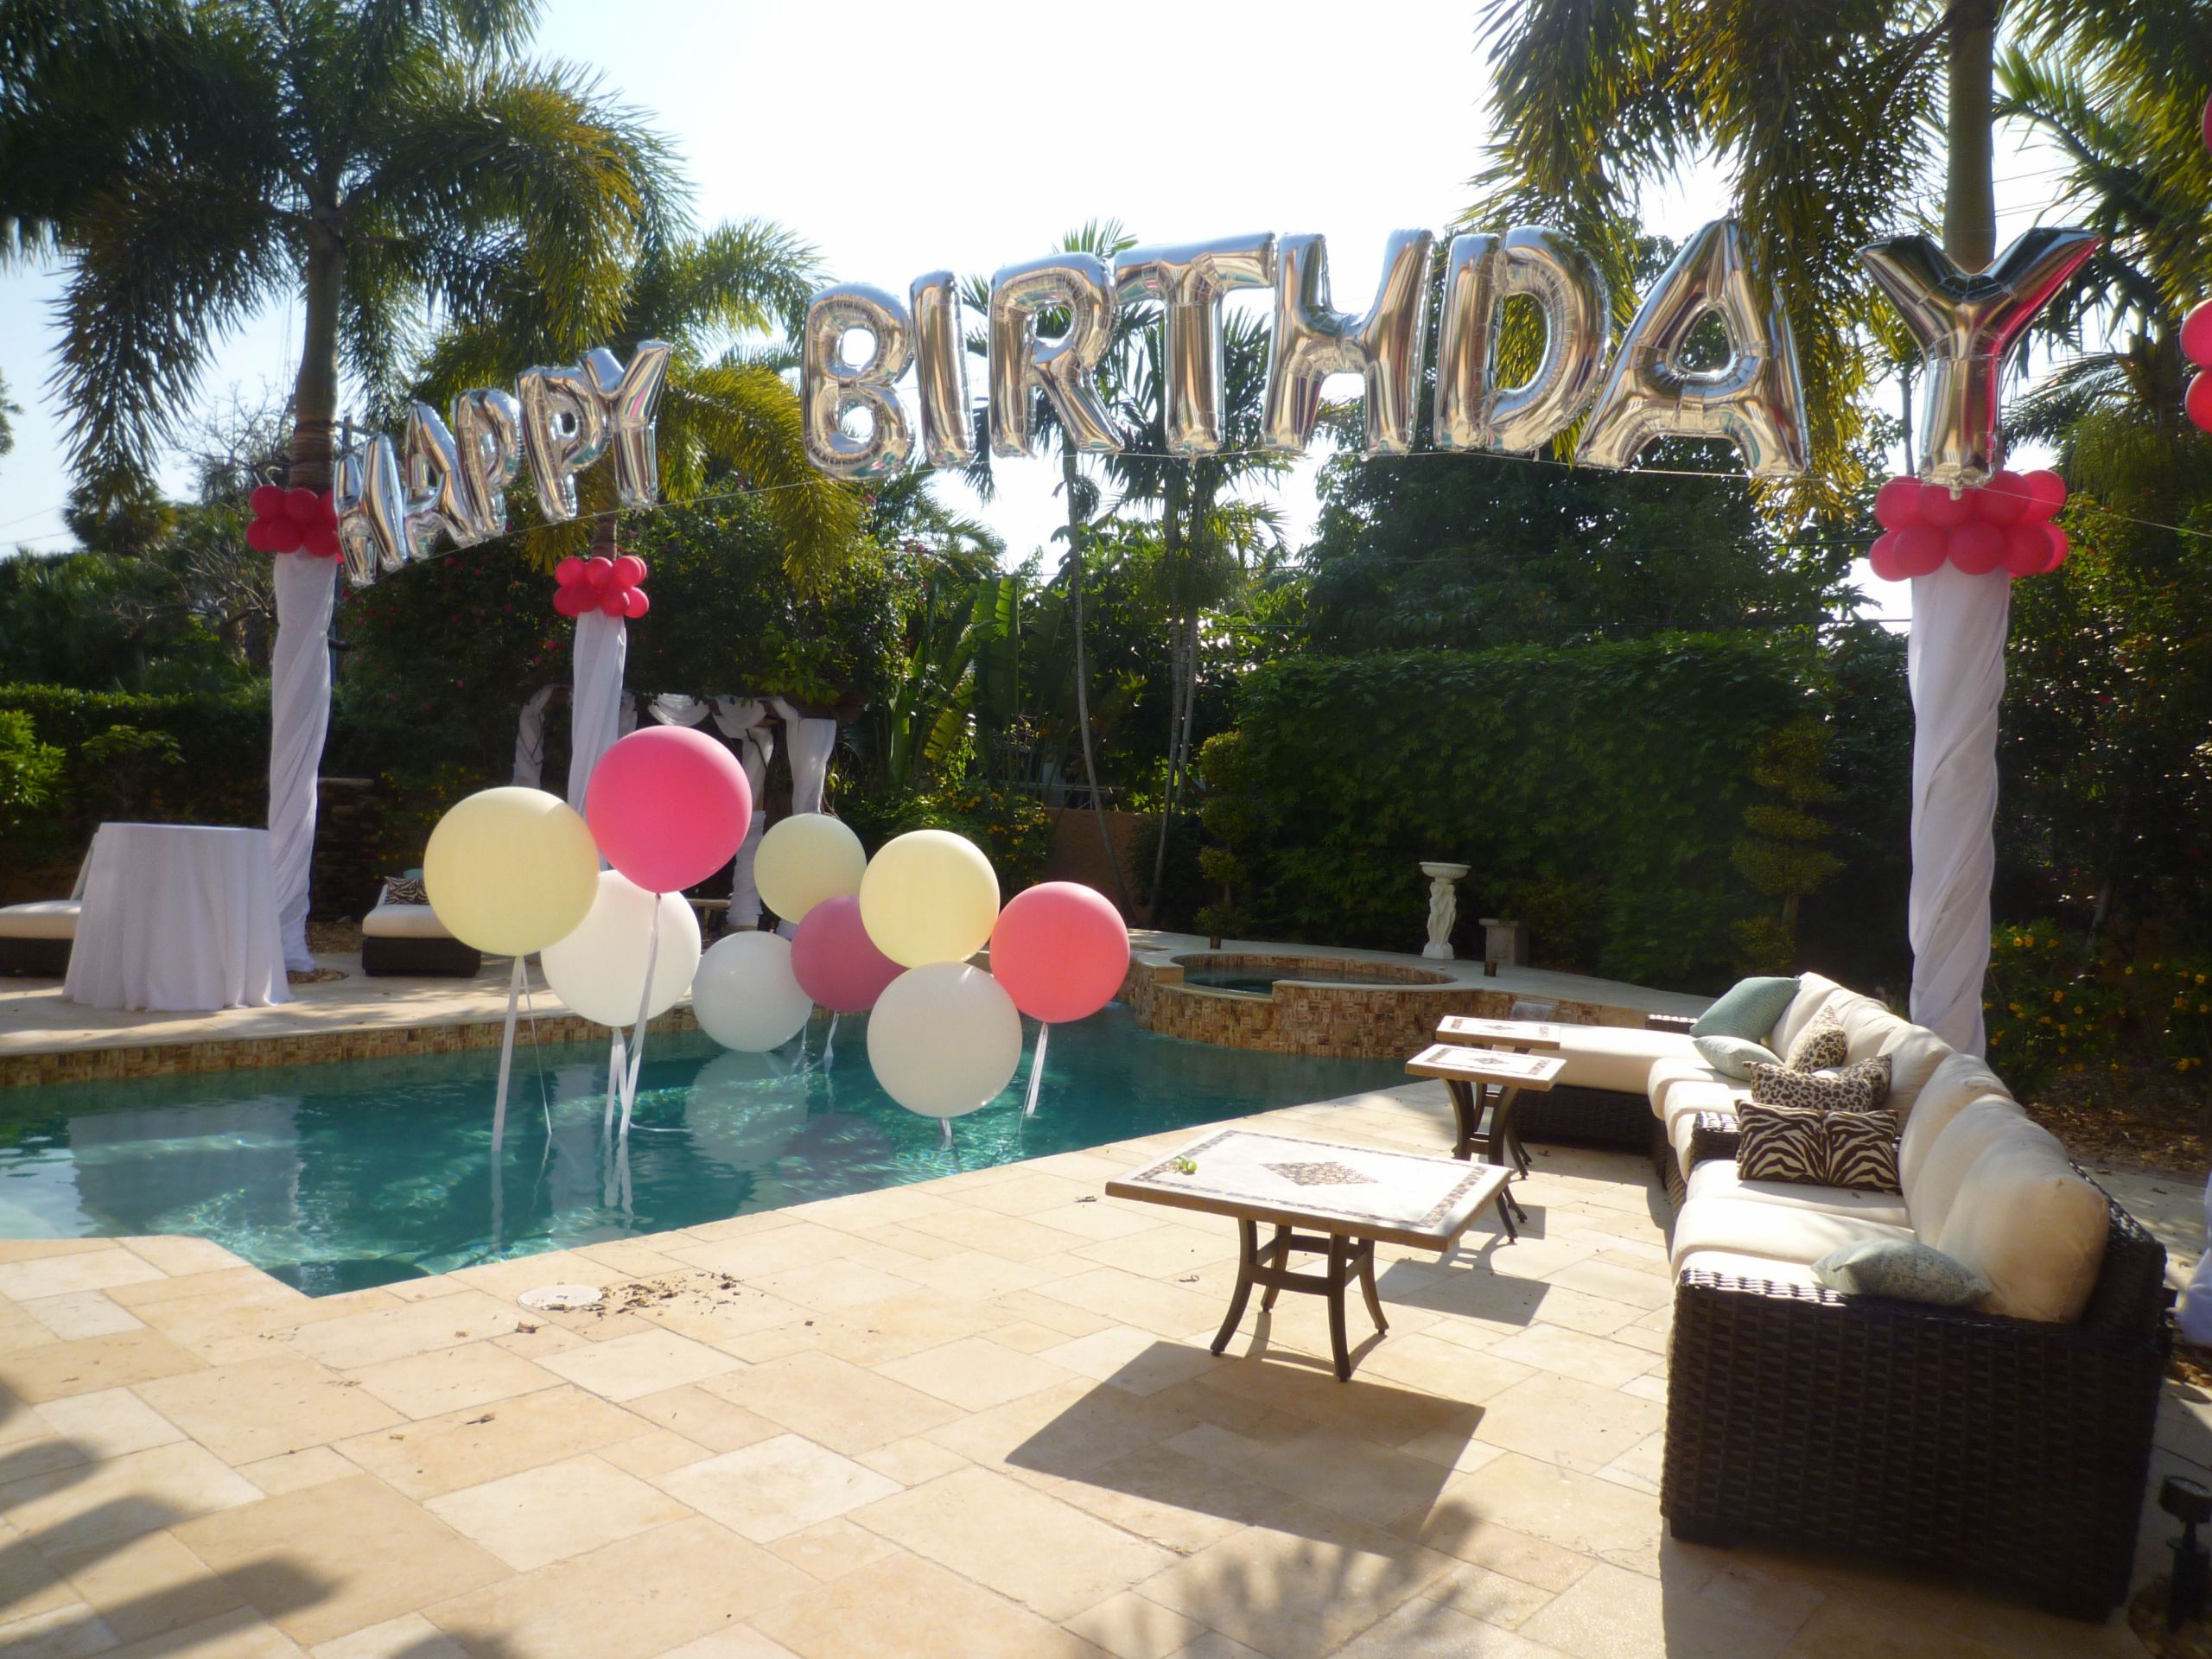 18Th Birthday Backyard Party Ideas
 Birthday balloon arch over a swimming pool Backyard party